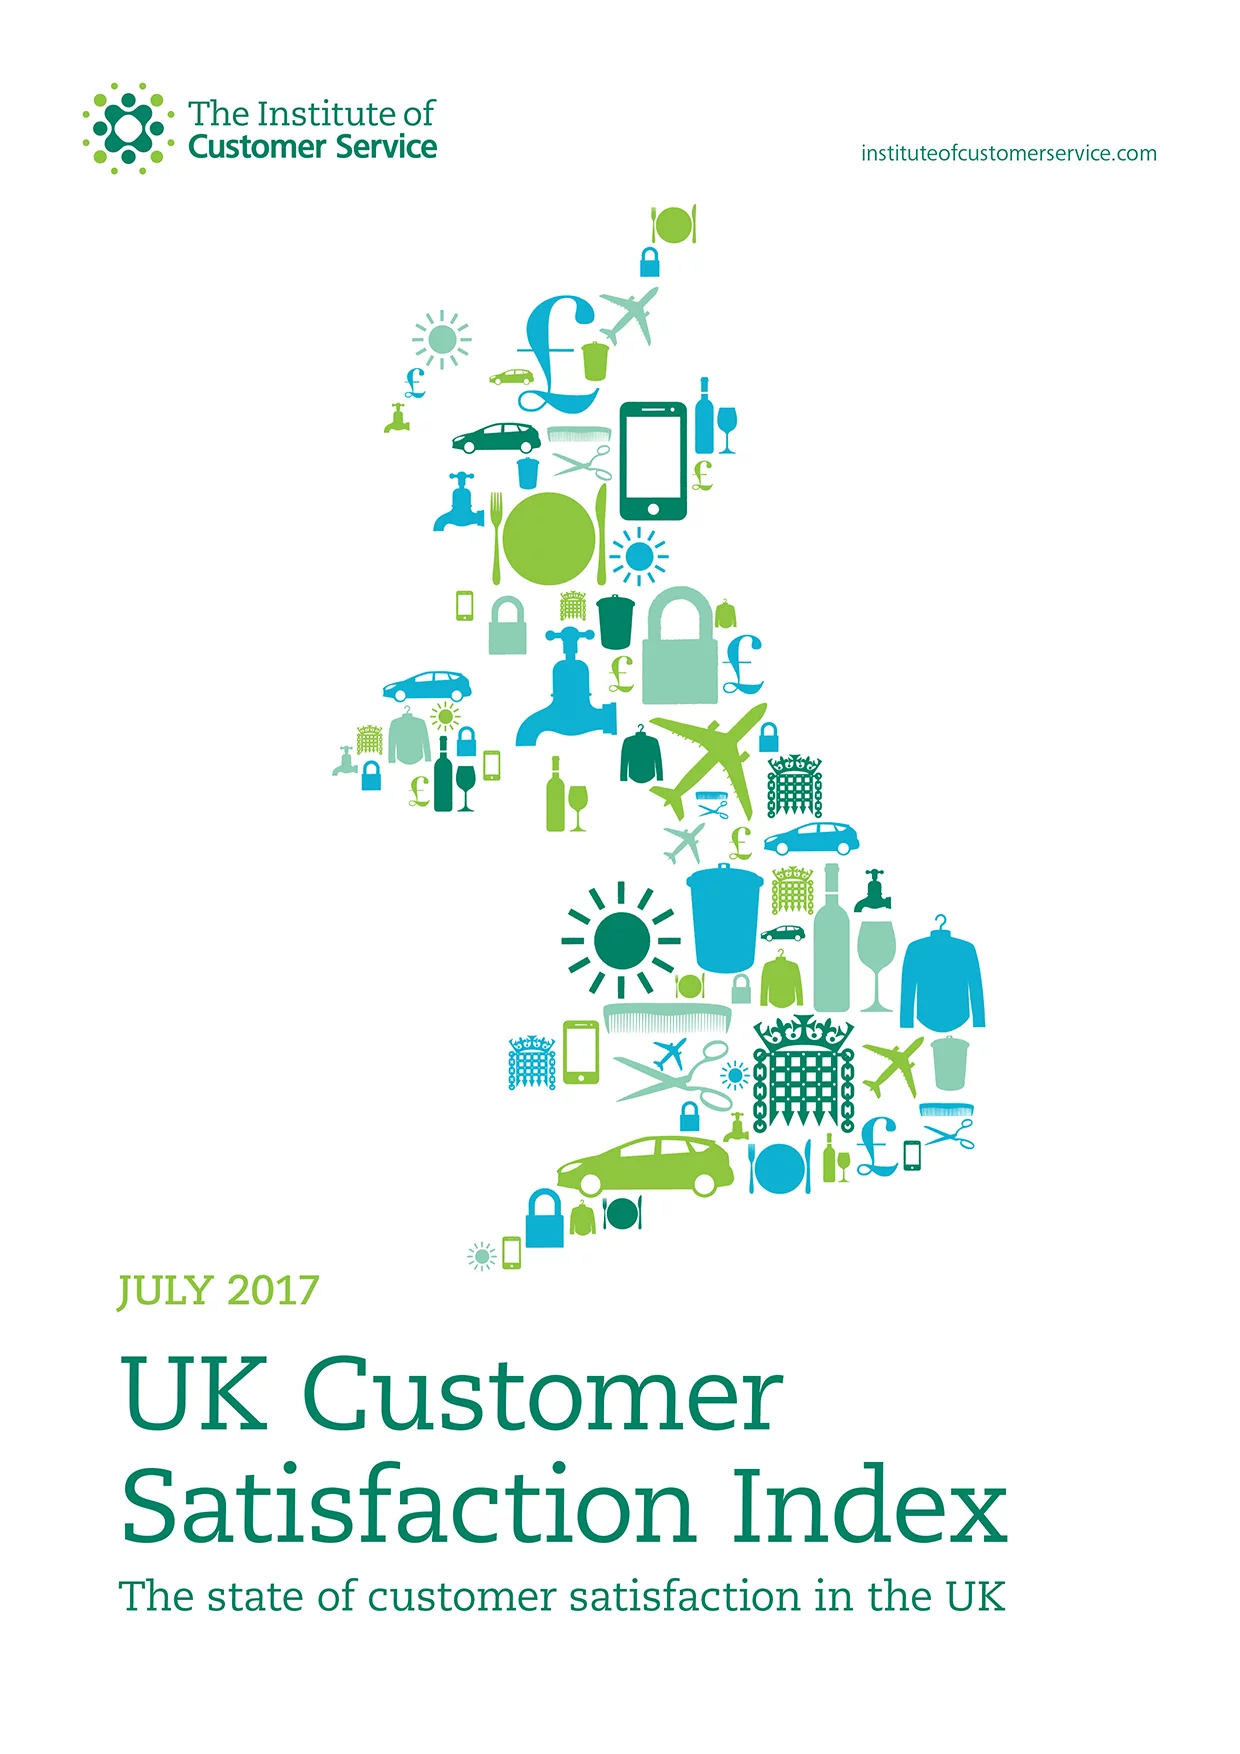 UKCSI: The state of customer satisfaction in the UK – July 2017